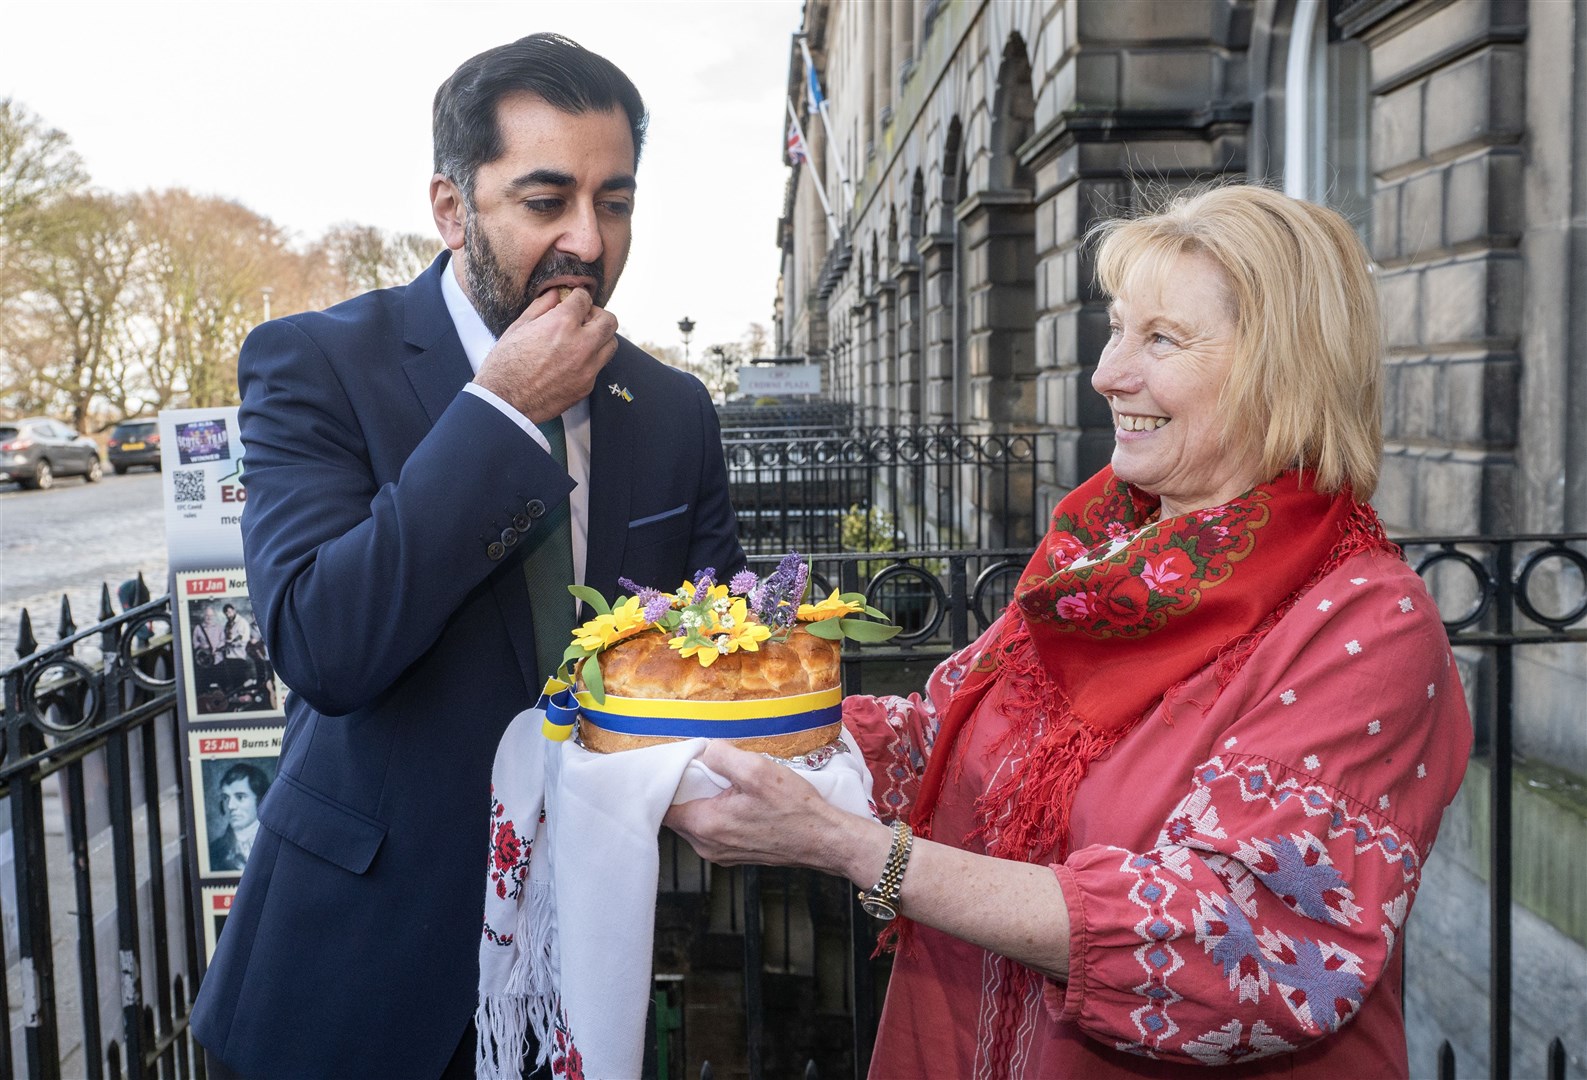 Eating humble pie? SNP leadership candidate Humza Yousaf made a blunder while on a visit to a Ukrainian association in Edinburgh (Lesley Martin/PA)